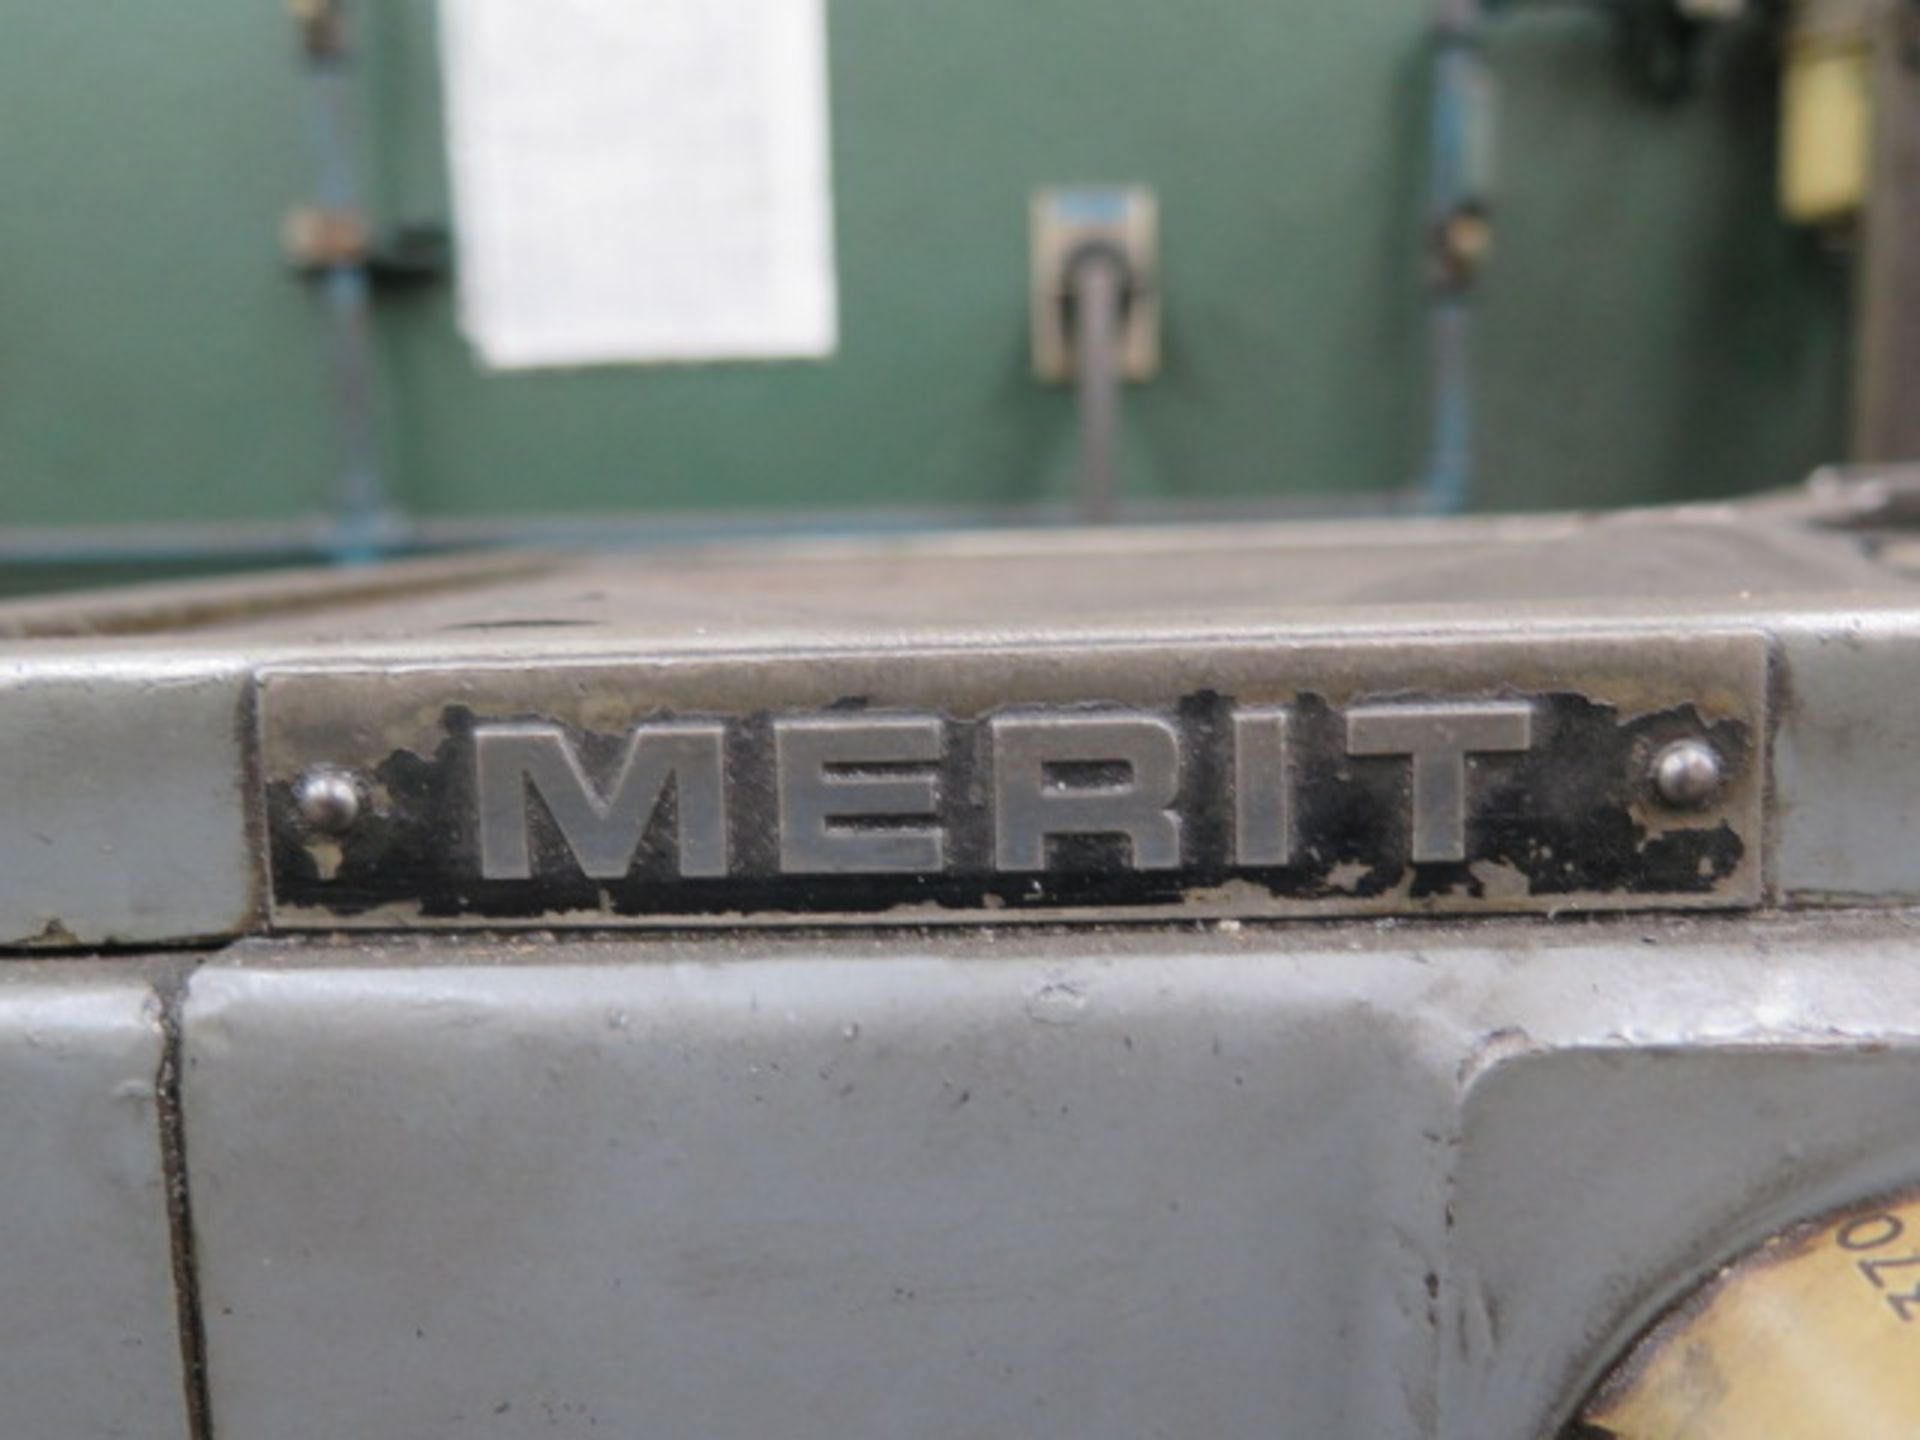 Merit 15" x 42" Lathe s/n 48752 w/ 30-1800 RPM, Inch Threading, Tailstock, Steady Rest, SOLD AS IS - Image 10 of 10